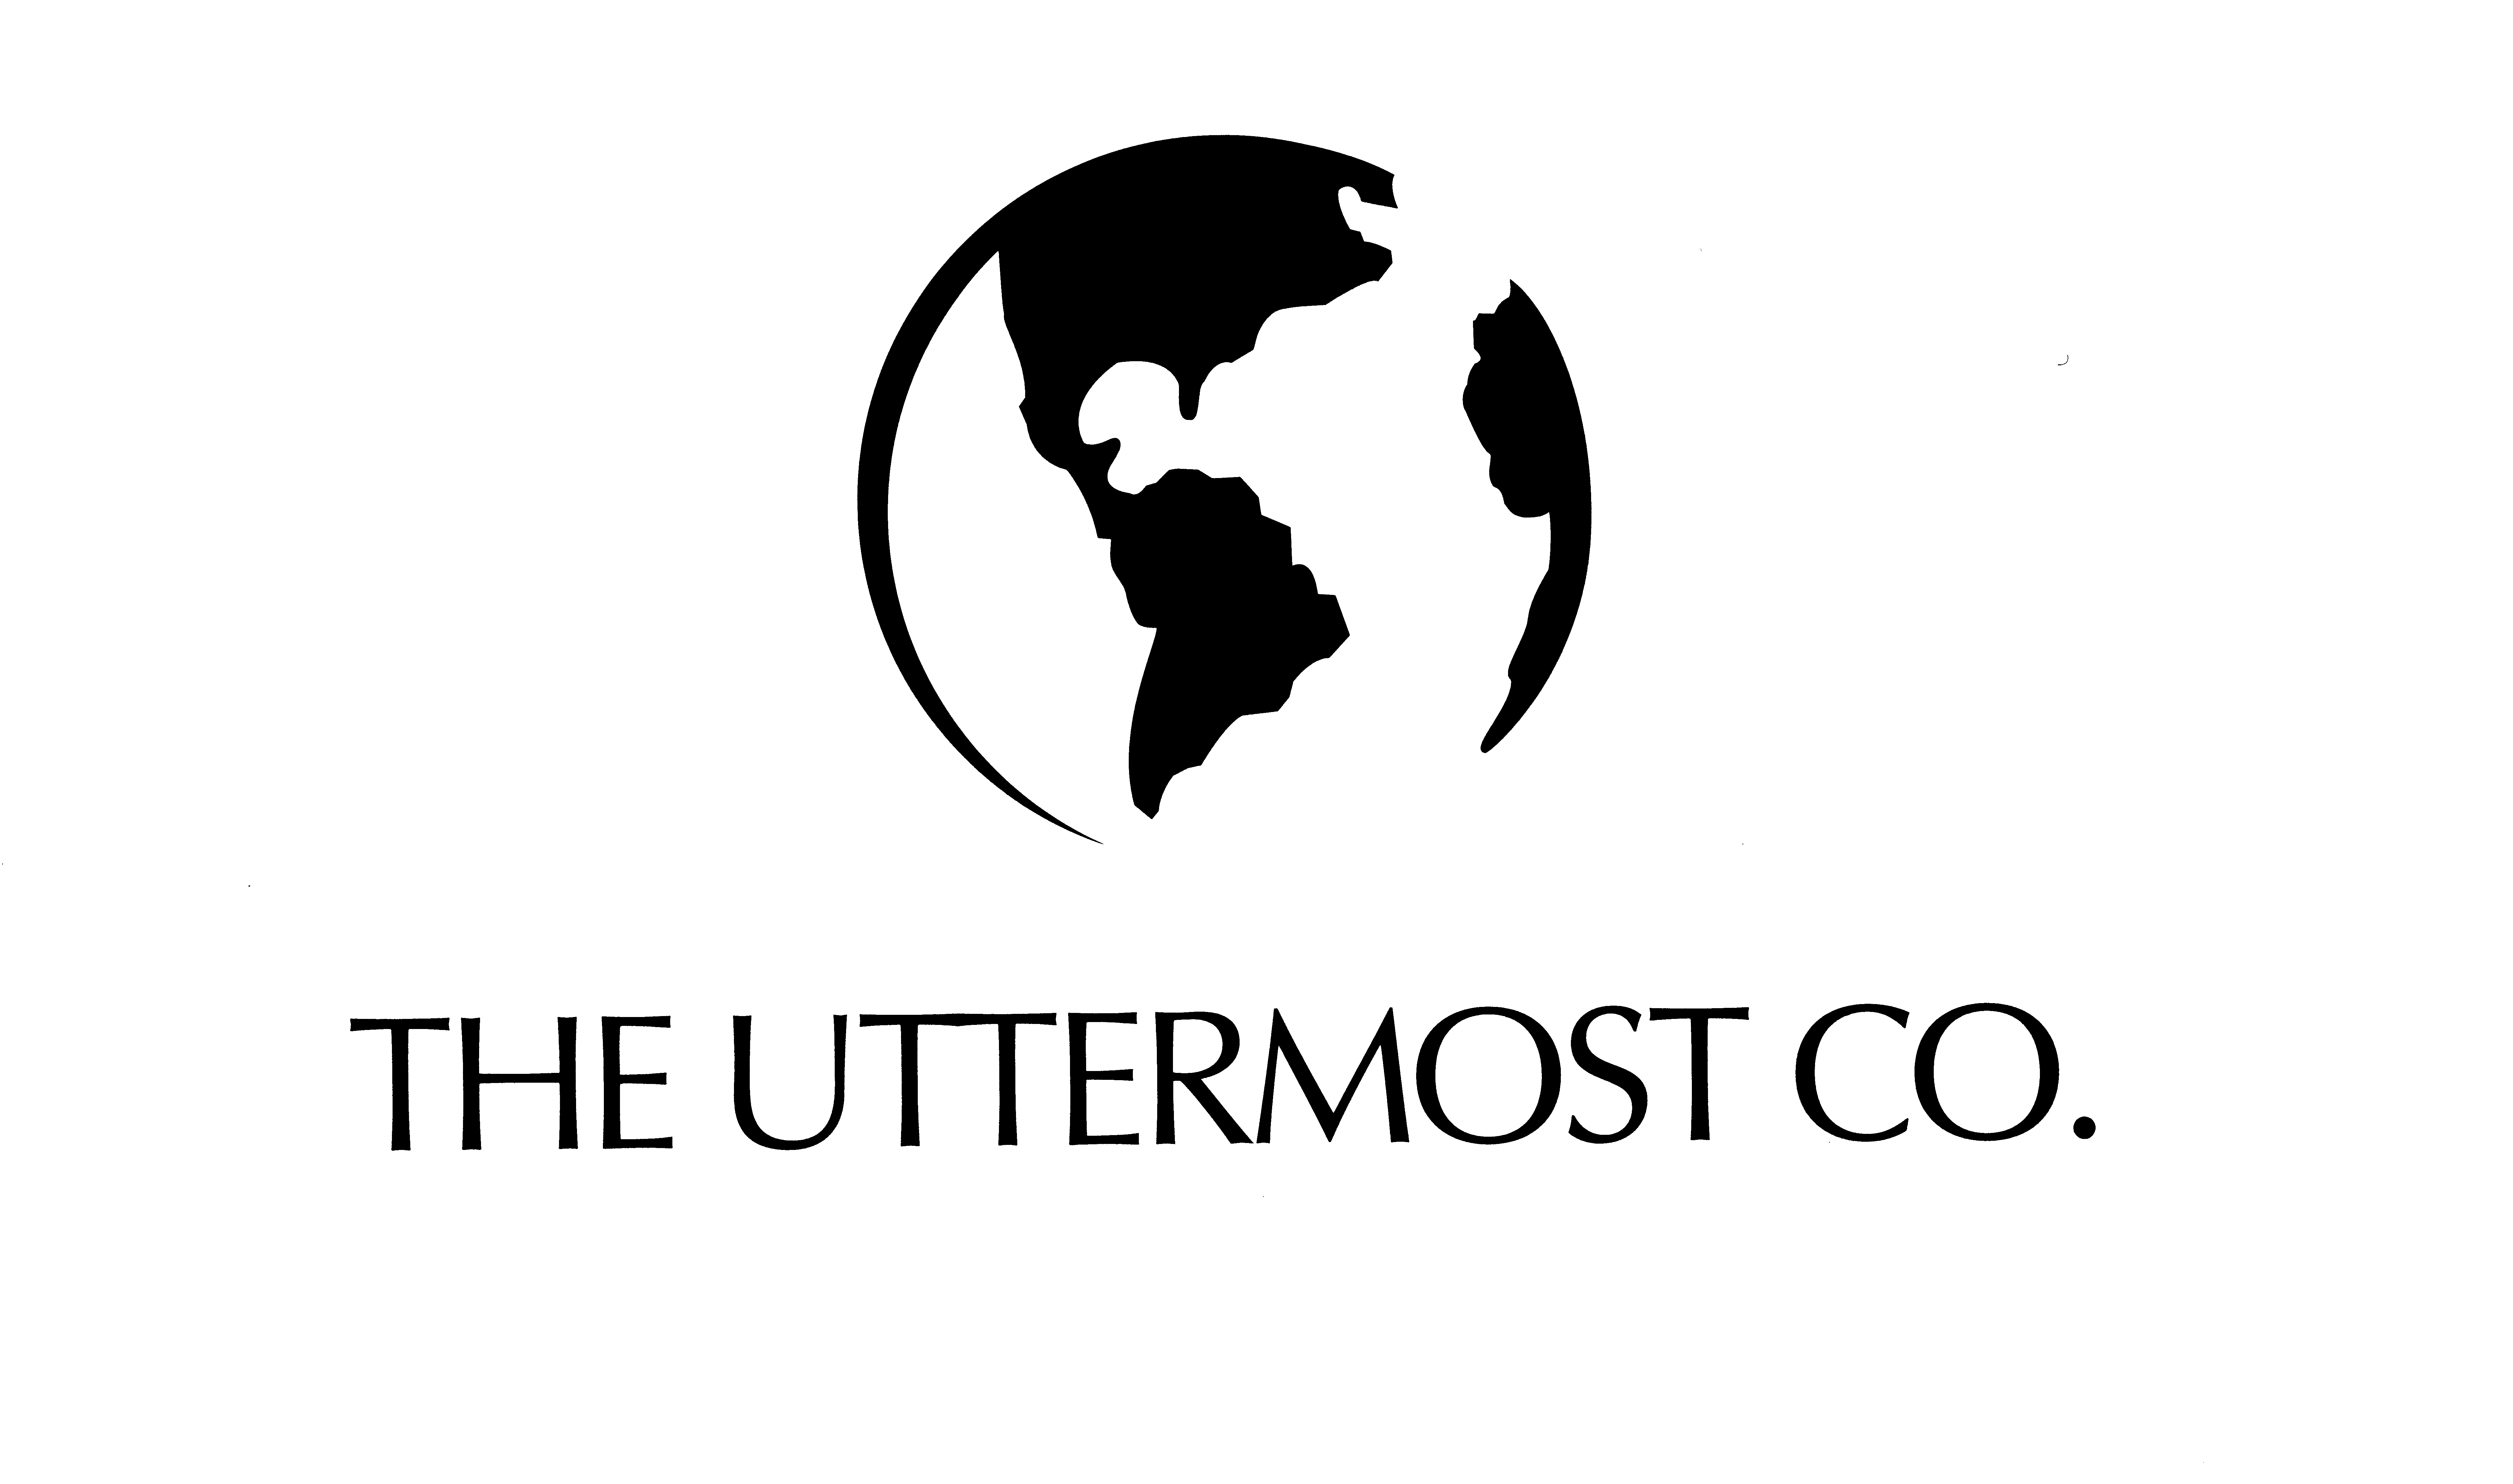  THE UTTERMOST CO.